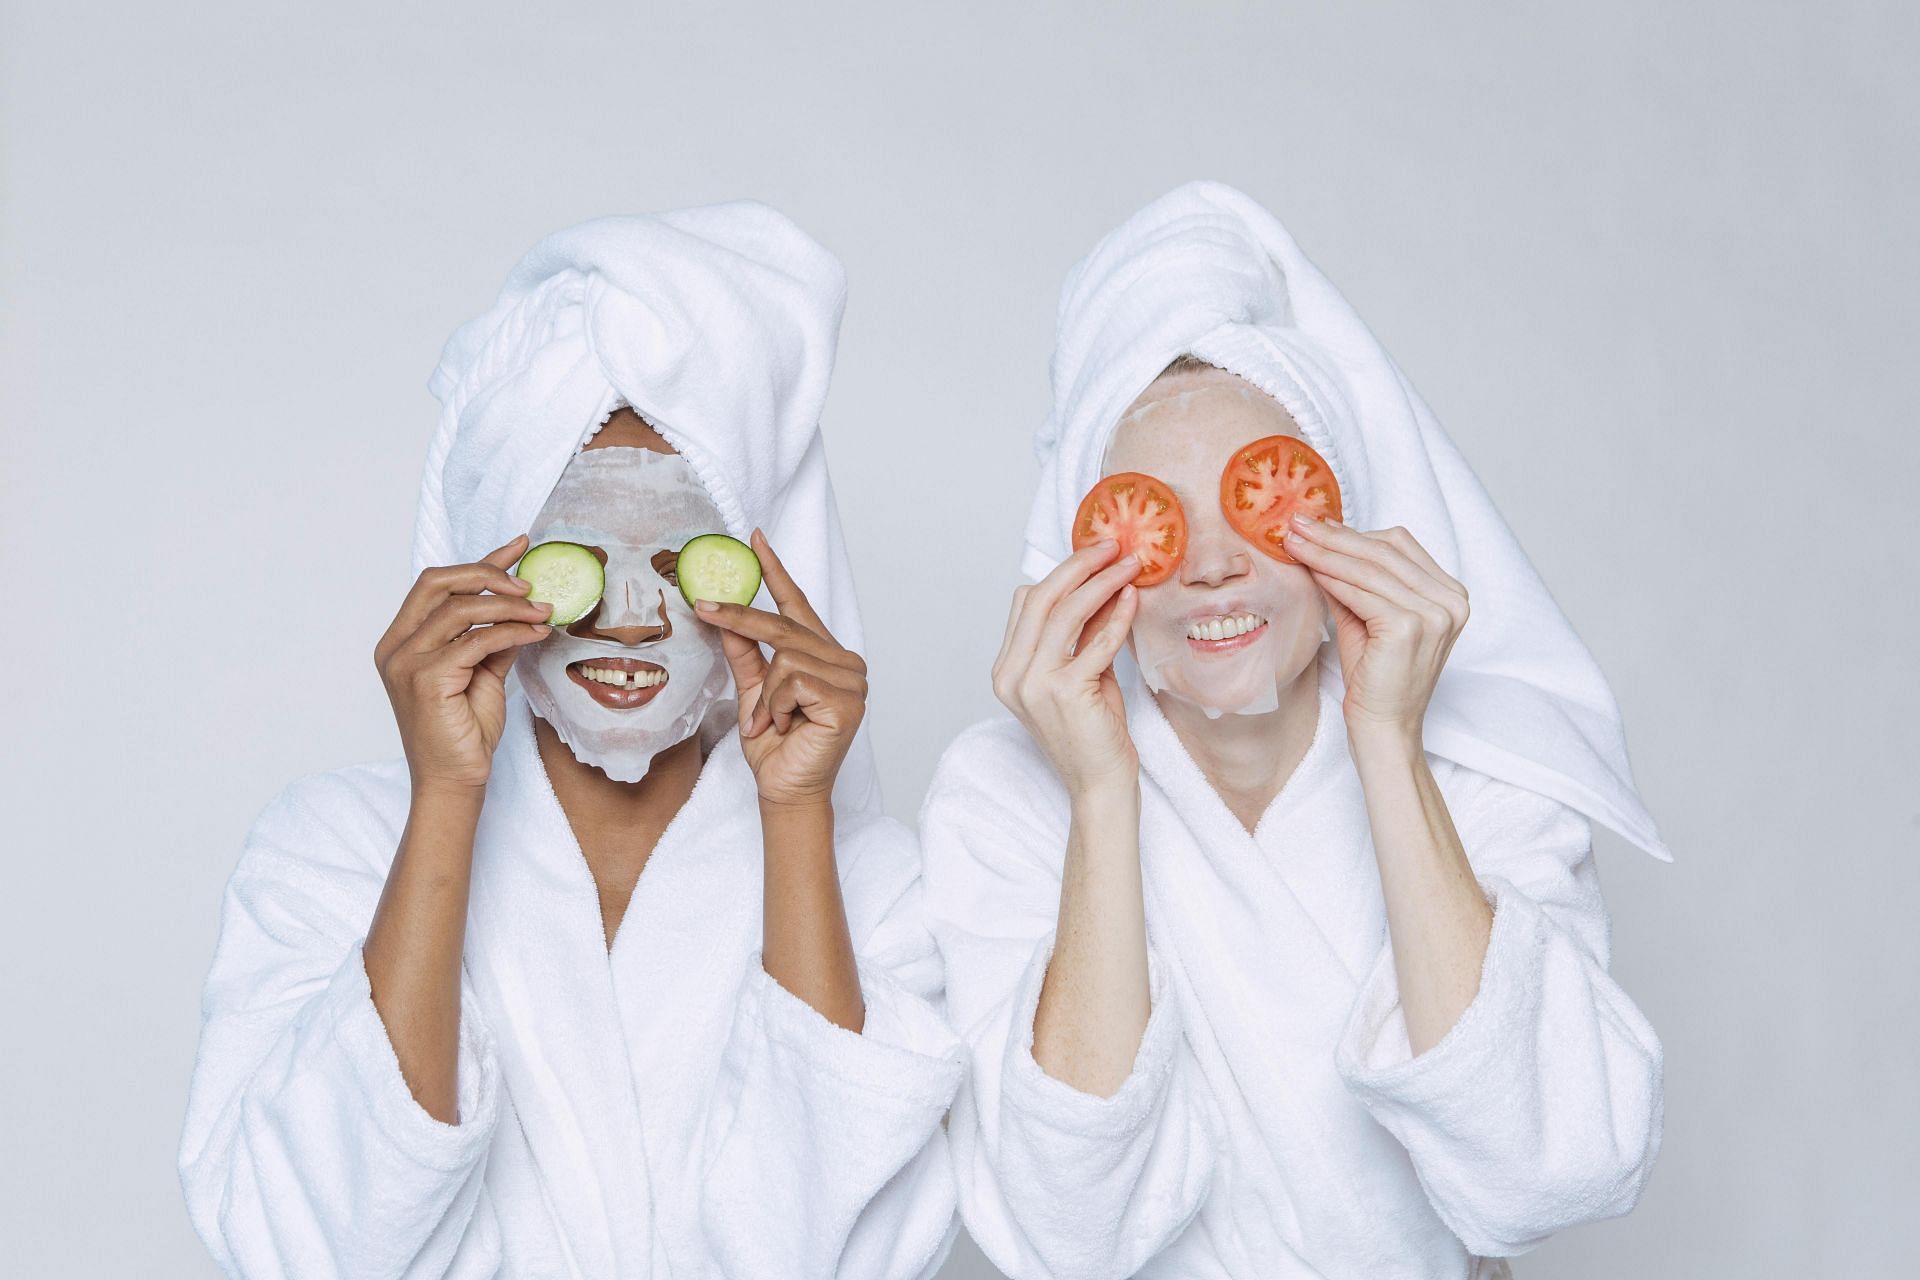 Tips to use a face mask  (image sourced via Pexels / Photo by angela)